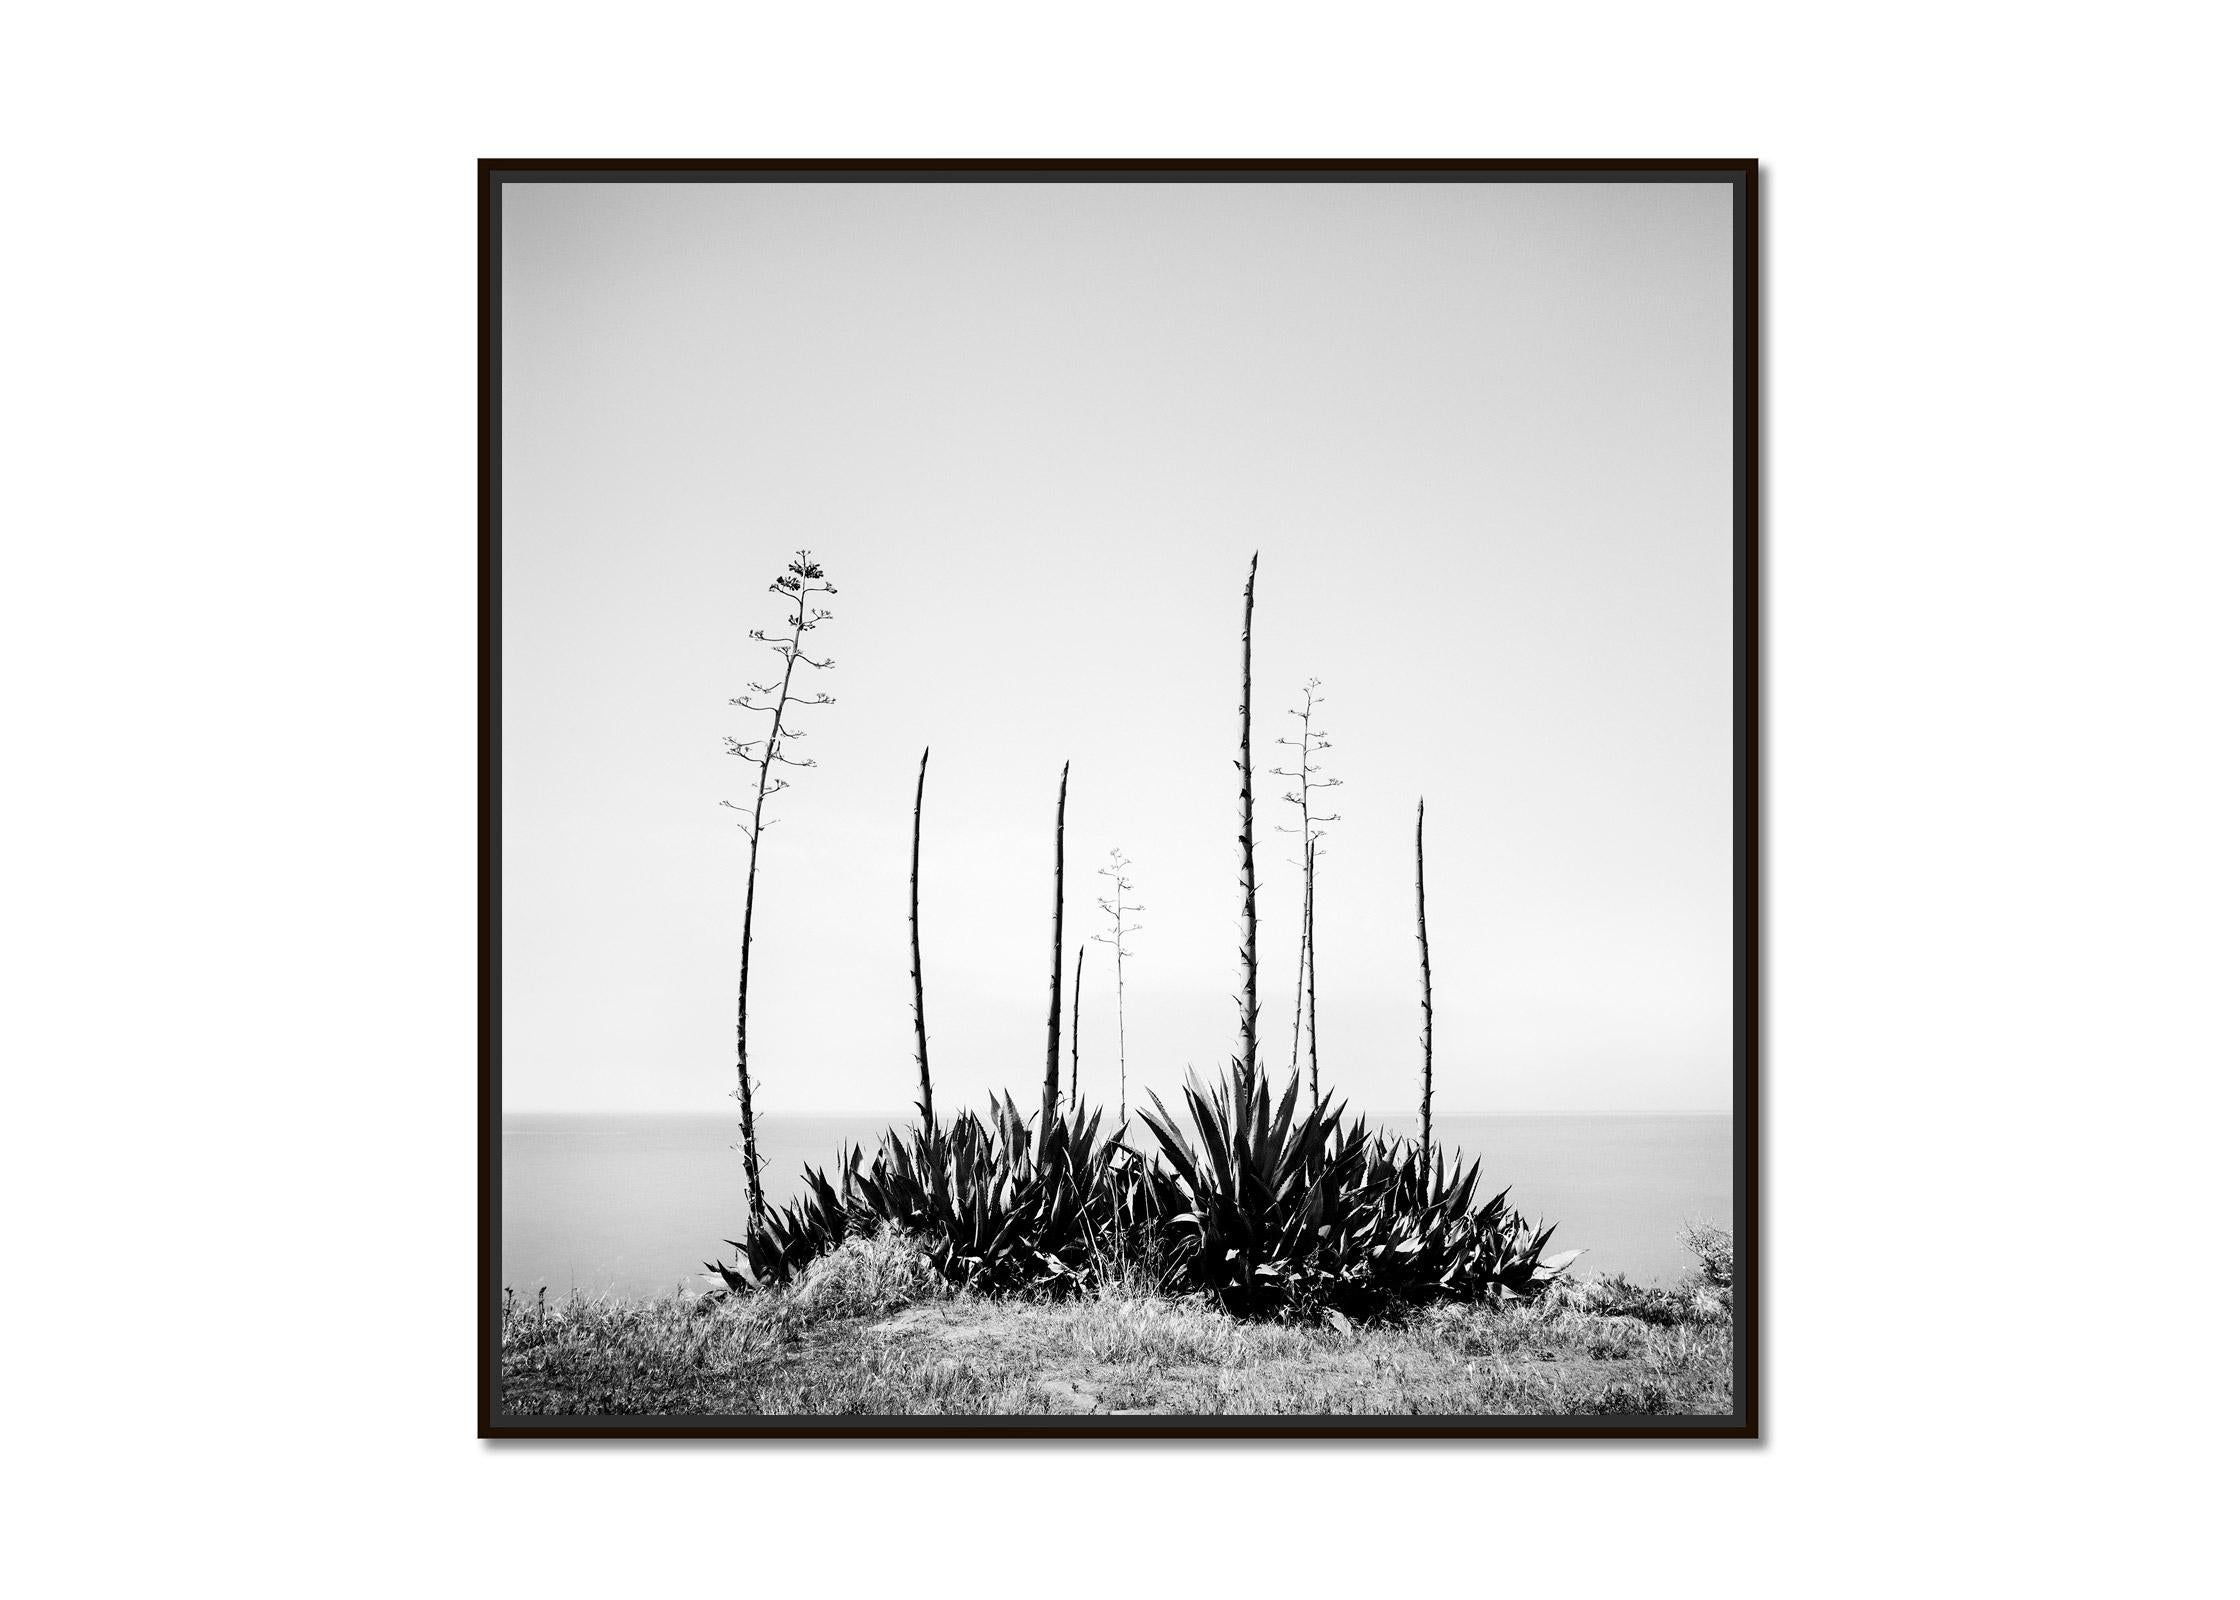 Agave deserti, sea view, California, USA, Black and White landscape photography - Photograph by Gerald Berghammer